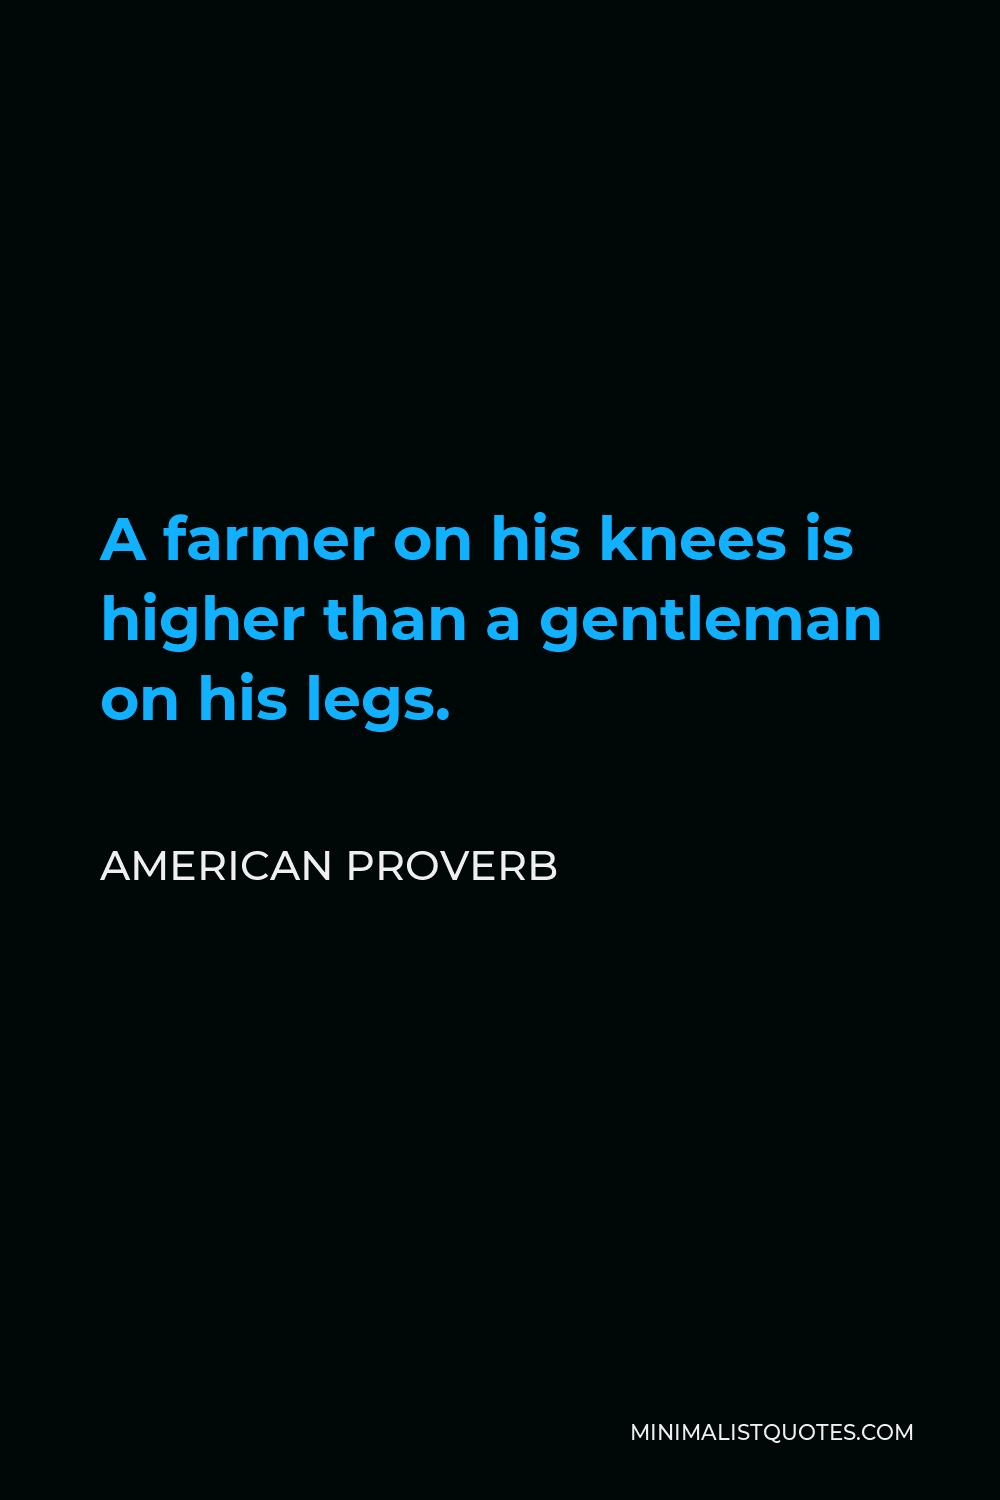 American Proverb Quote - A farmer on his knees is higher than a gentleman on his legs.